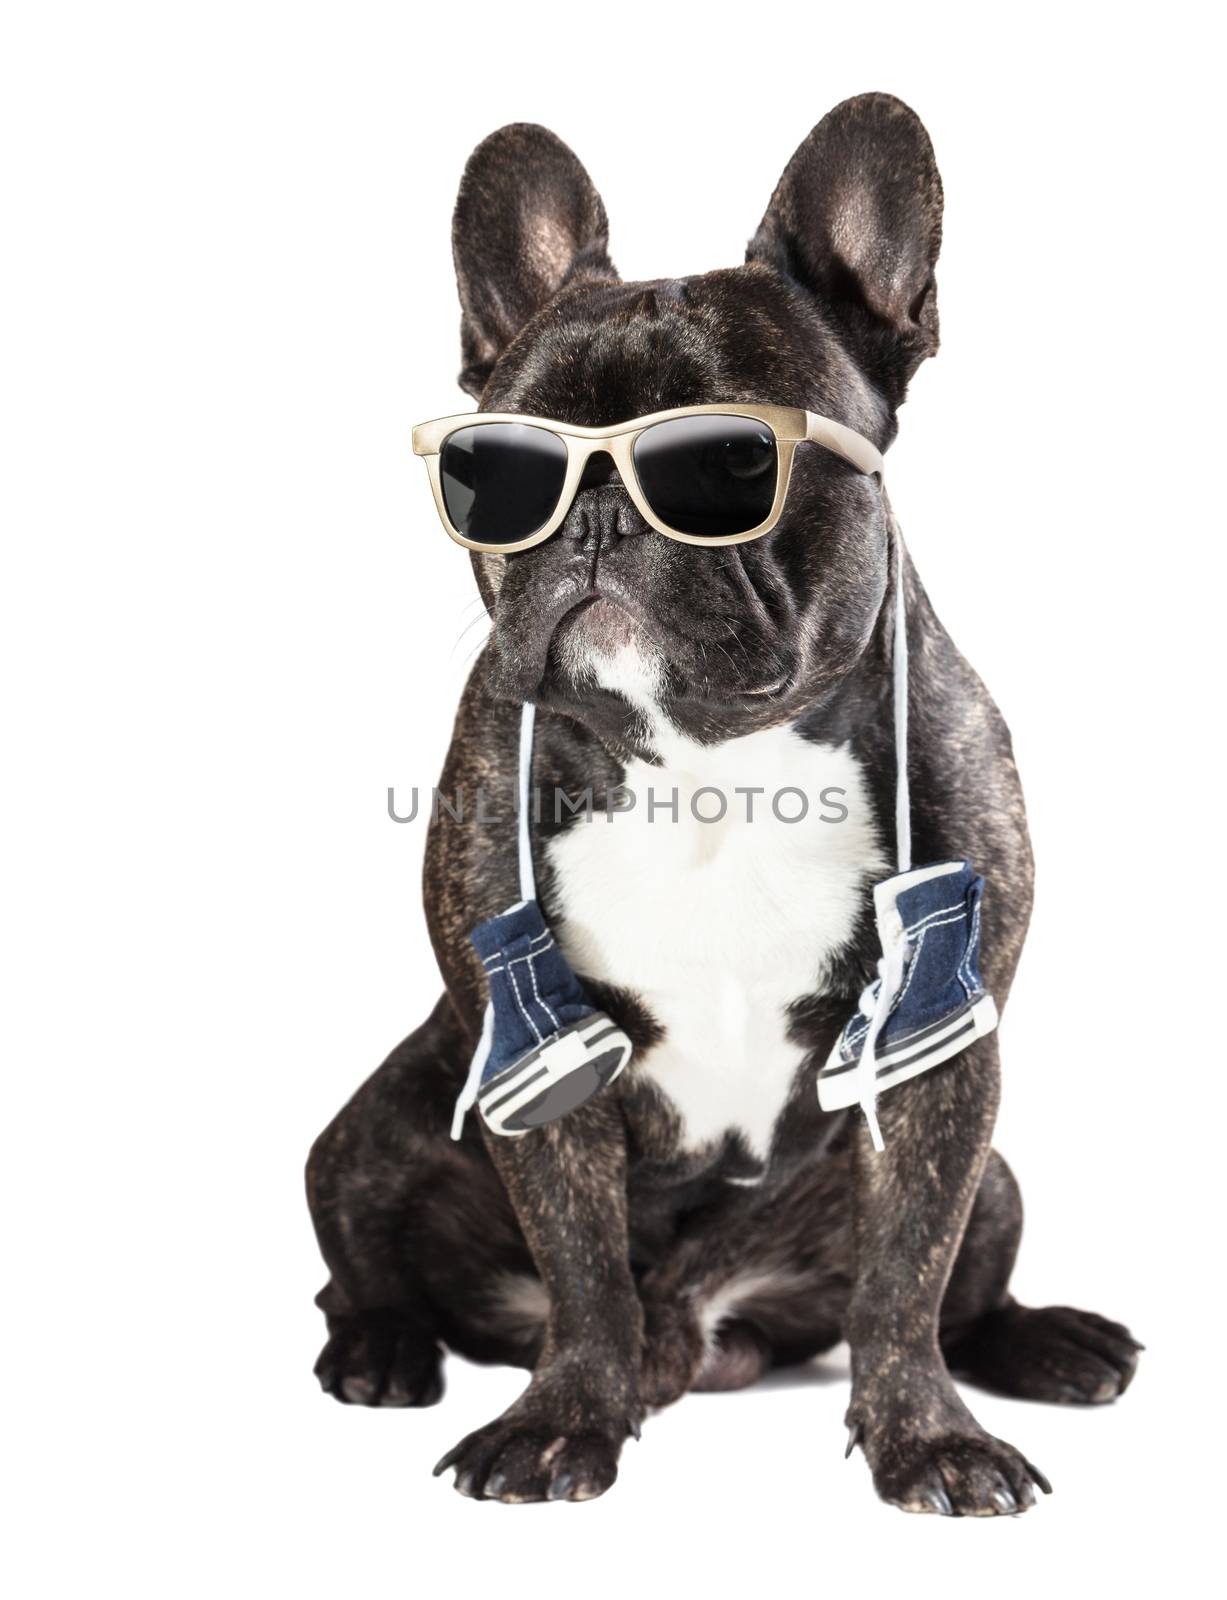 French bulldog in sunglasses and sneakers on the neck